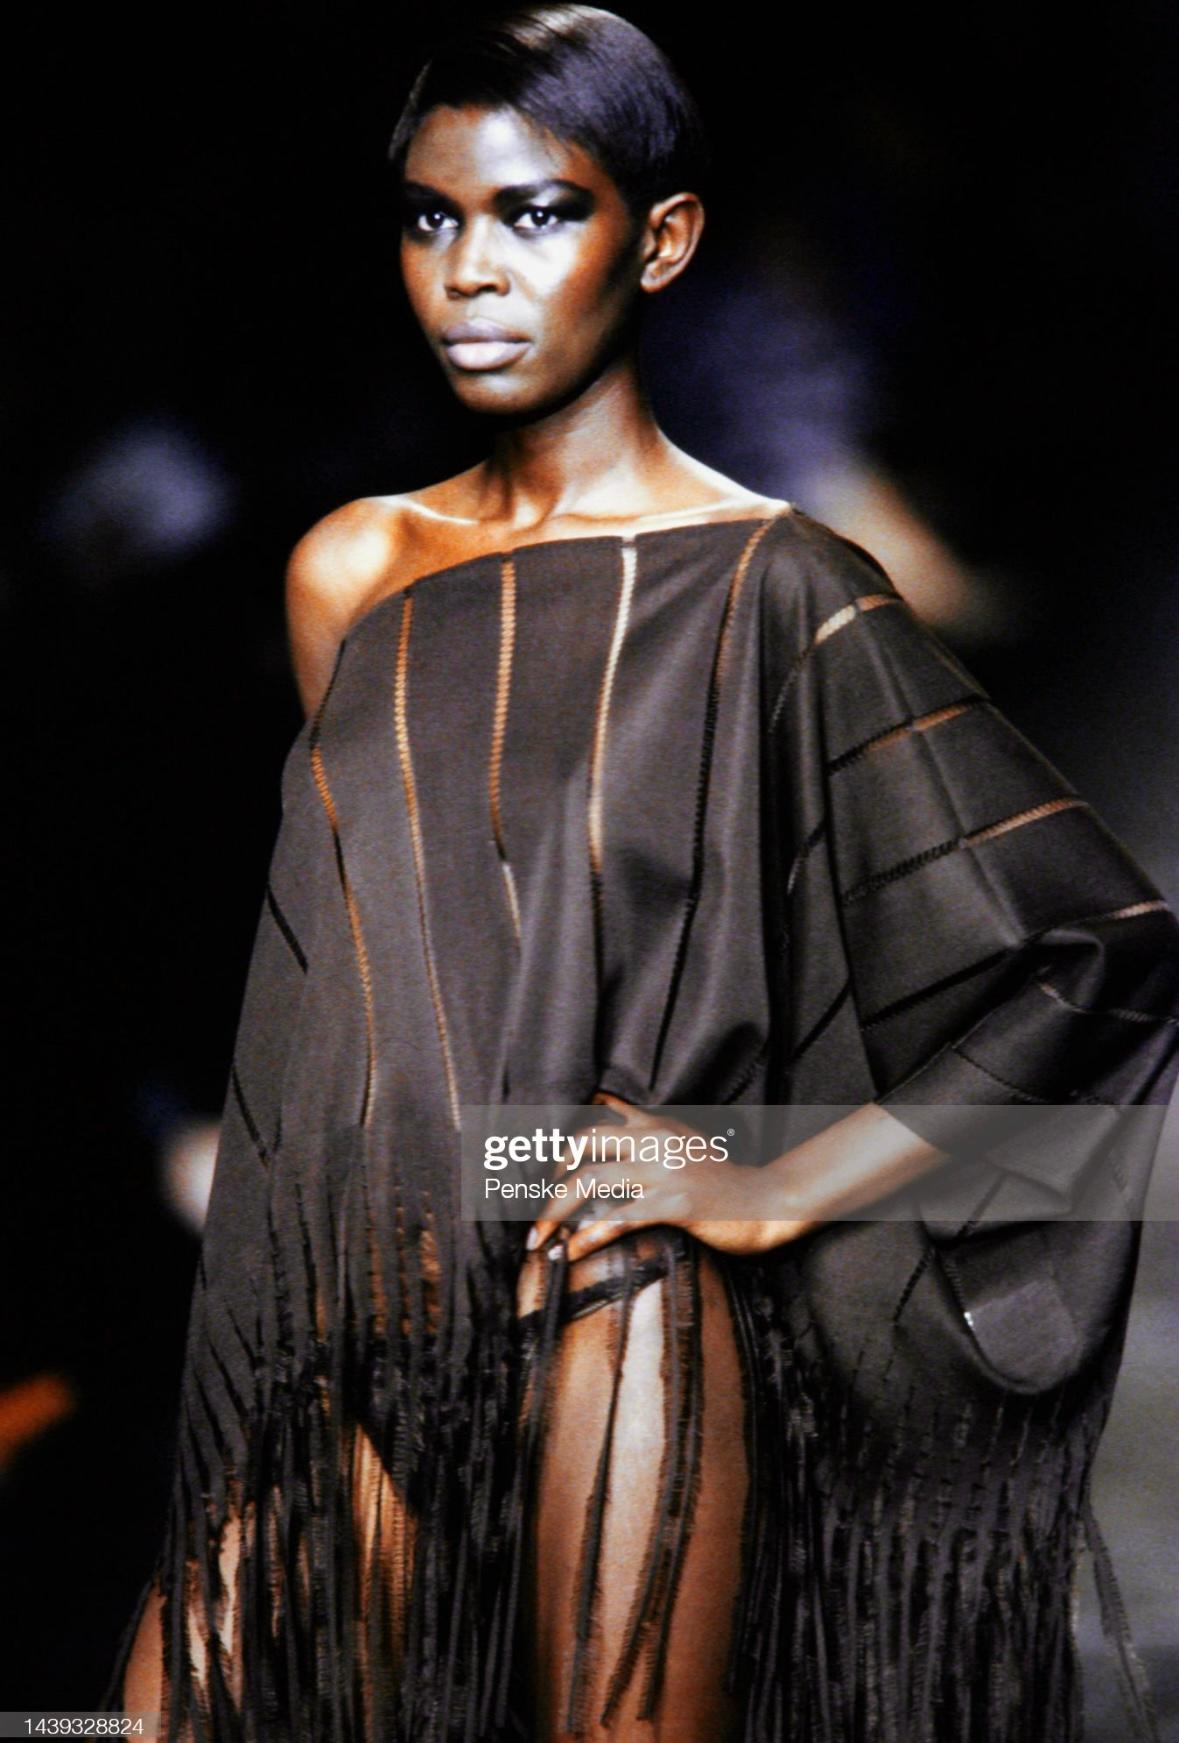 Presenting an absolutely fabulous black Yves Saint Laurent Rive Gauche caftan poncho, designed by Tom Ford. From the Spring/Summer 2002 collection, this caftan debuted on the season's runway as look 37 modeled by Caroline Bwonobo and was featured in